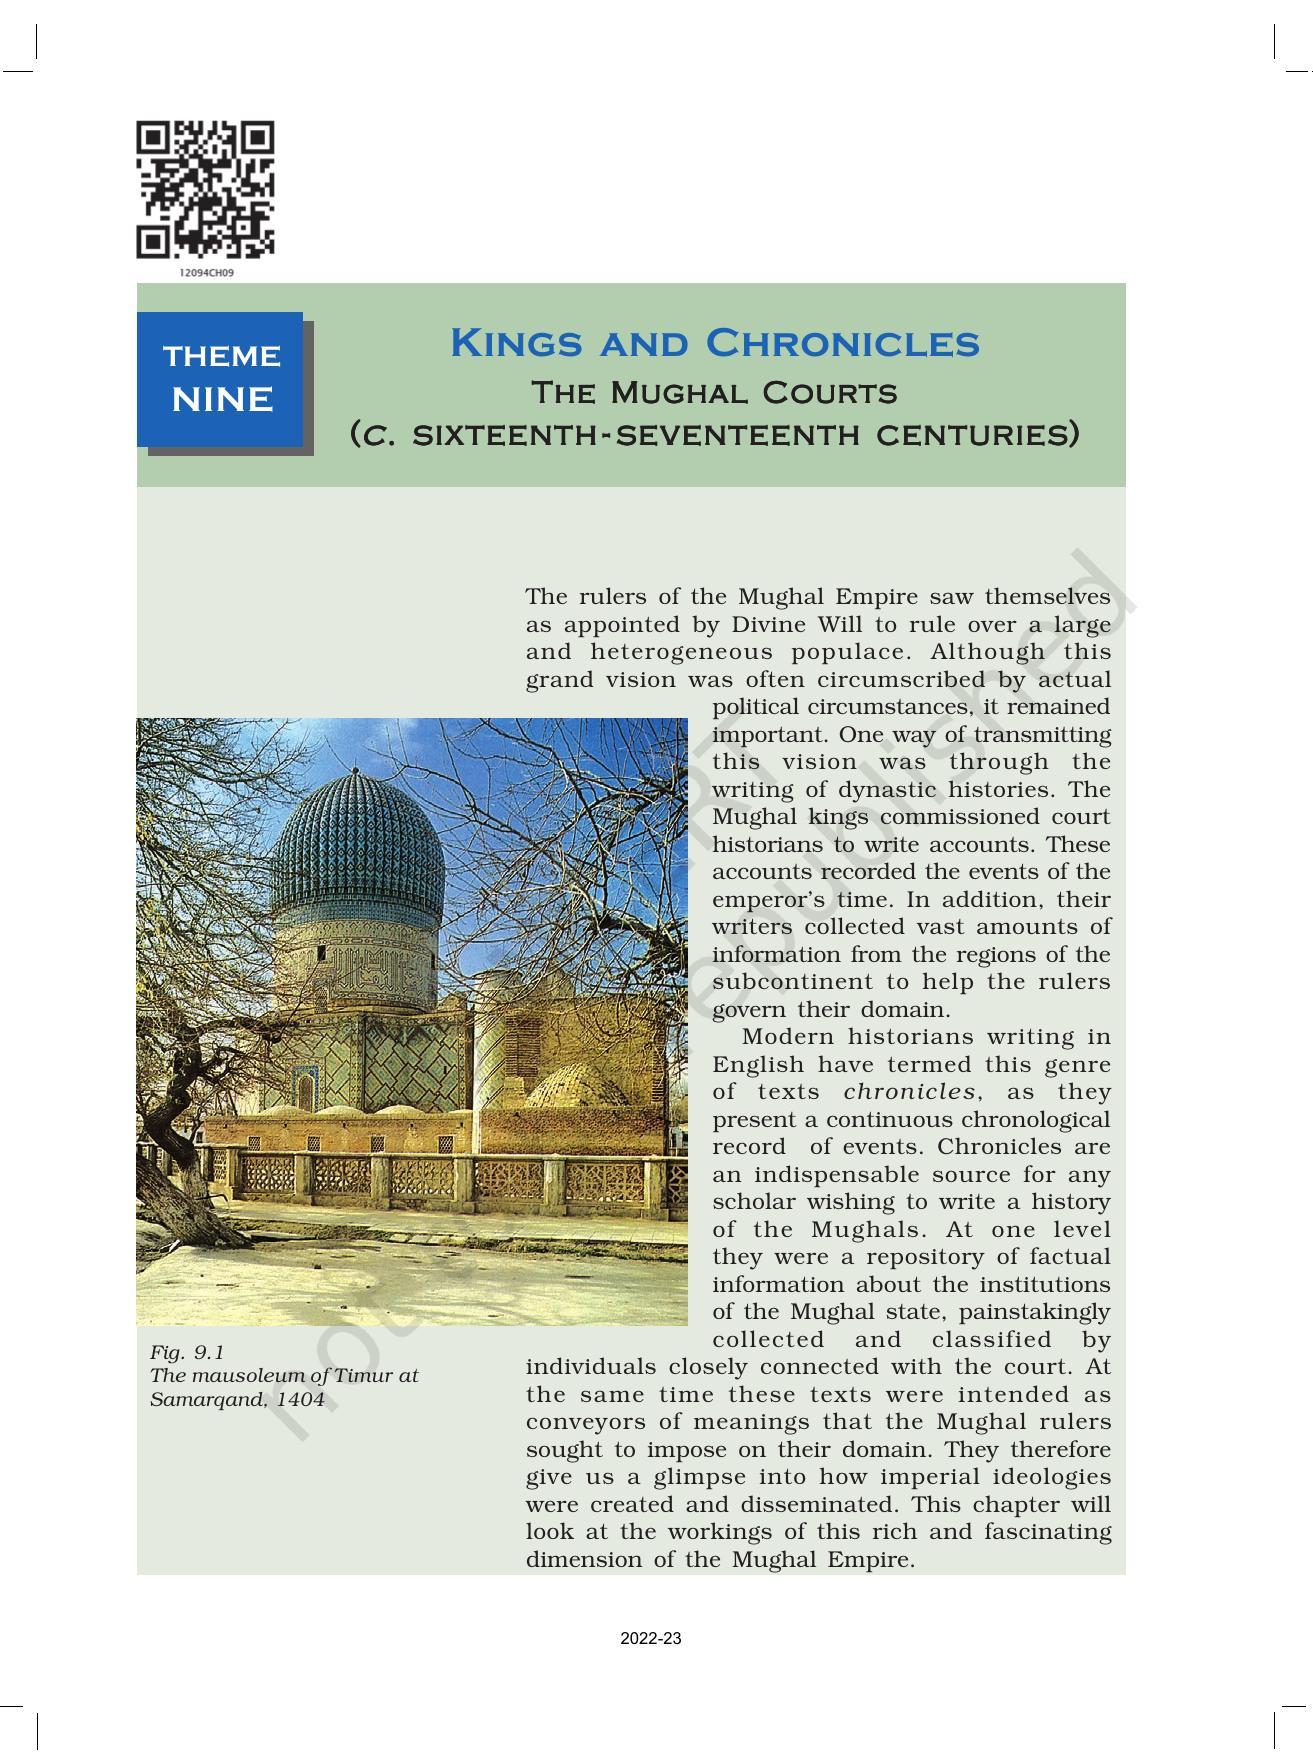 NCERT Book for Class 12 History (Part-II) Chapter 9 Kings and Chronicles - Page 1